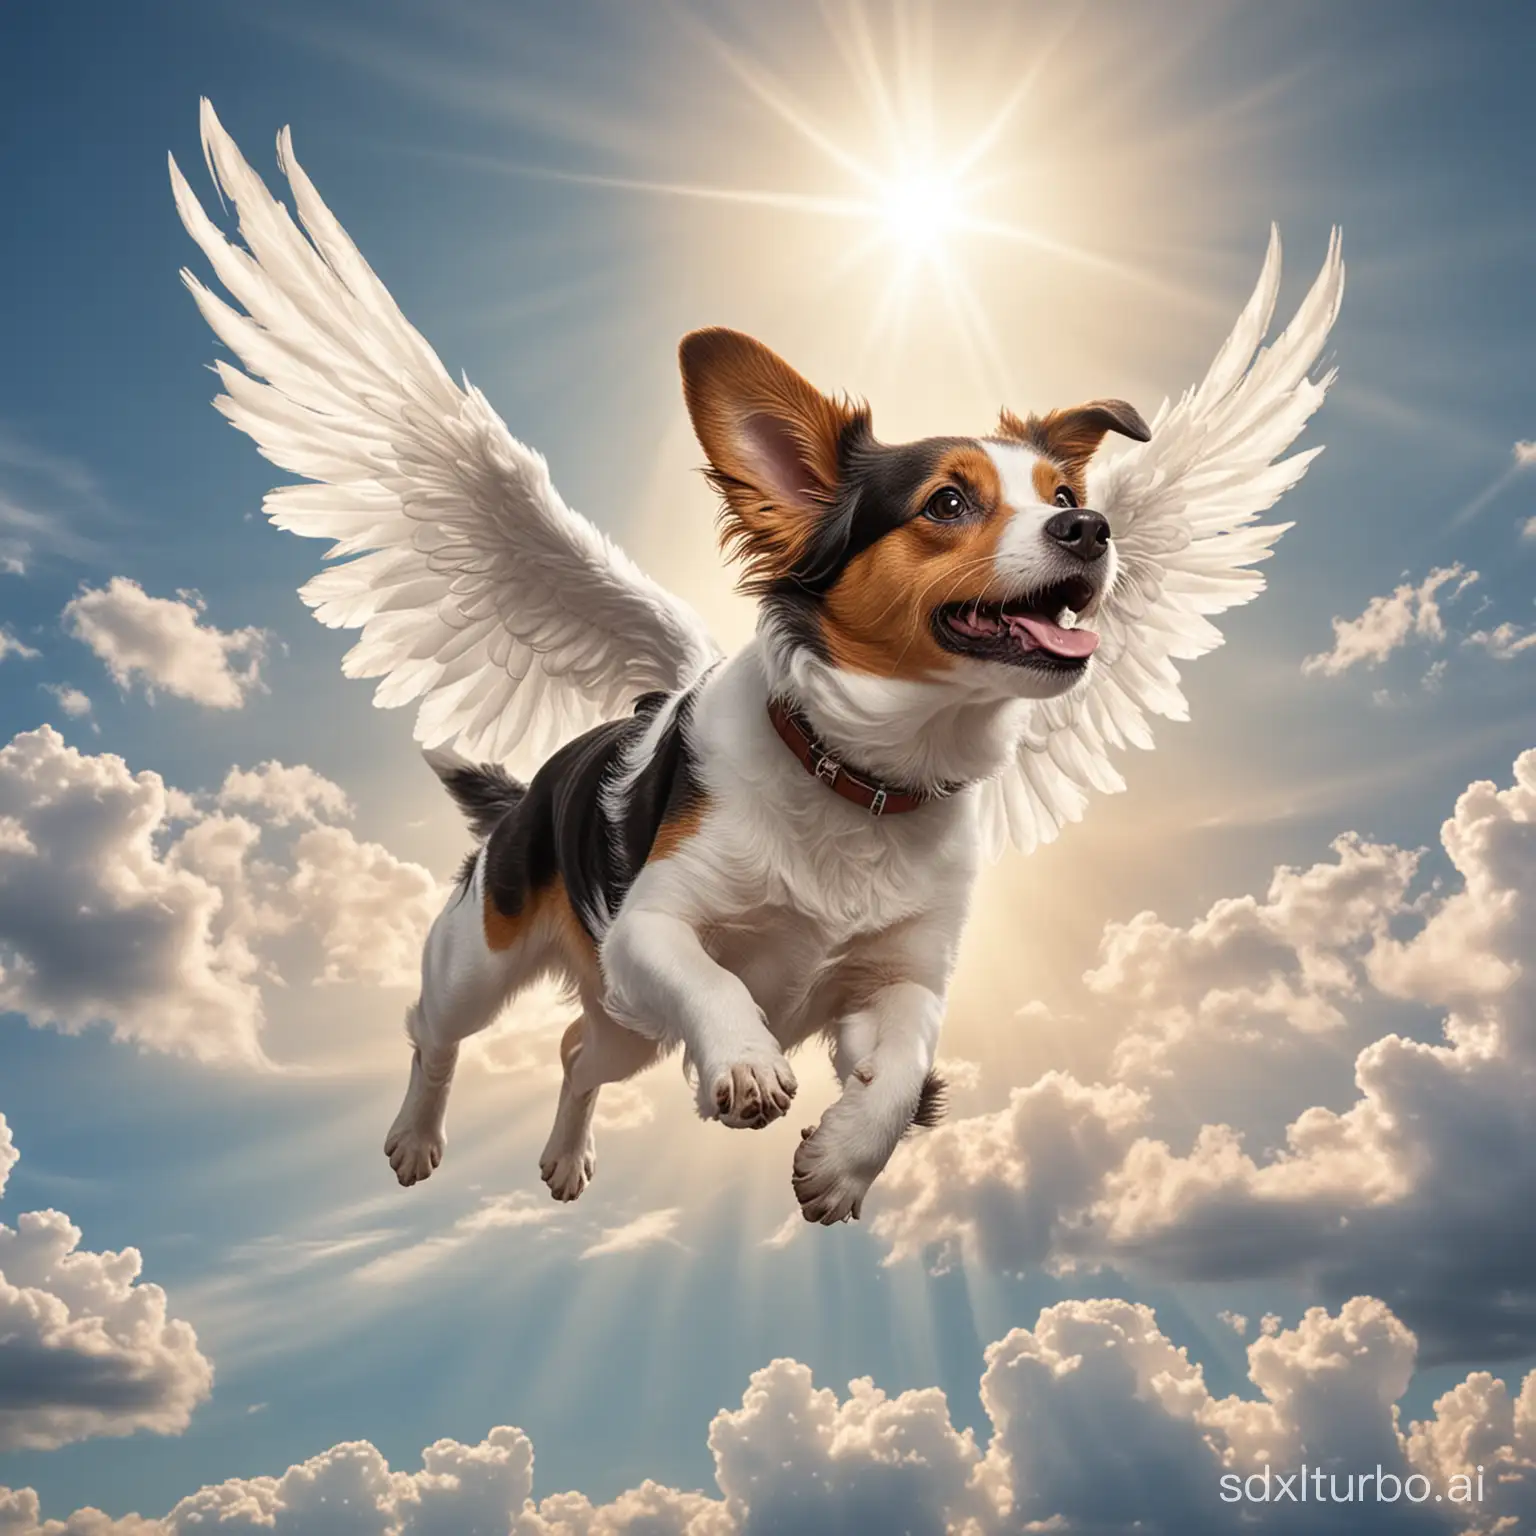 Flying-Dog-with-Angelic-Wings-Soaring-in-the-Sky